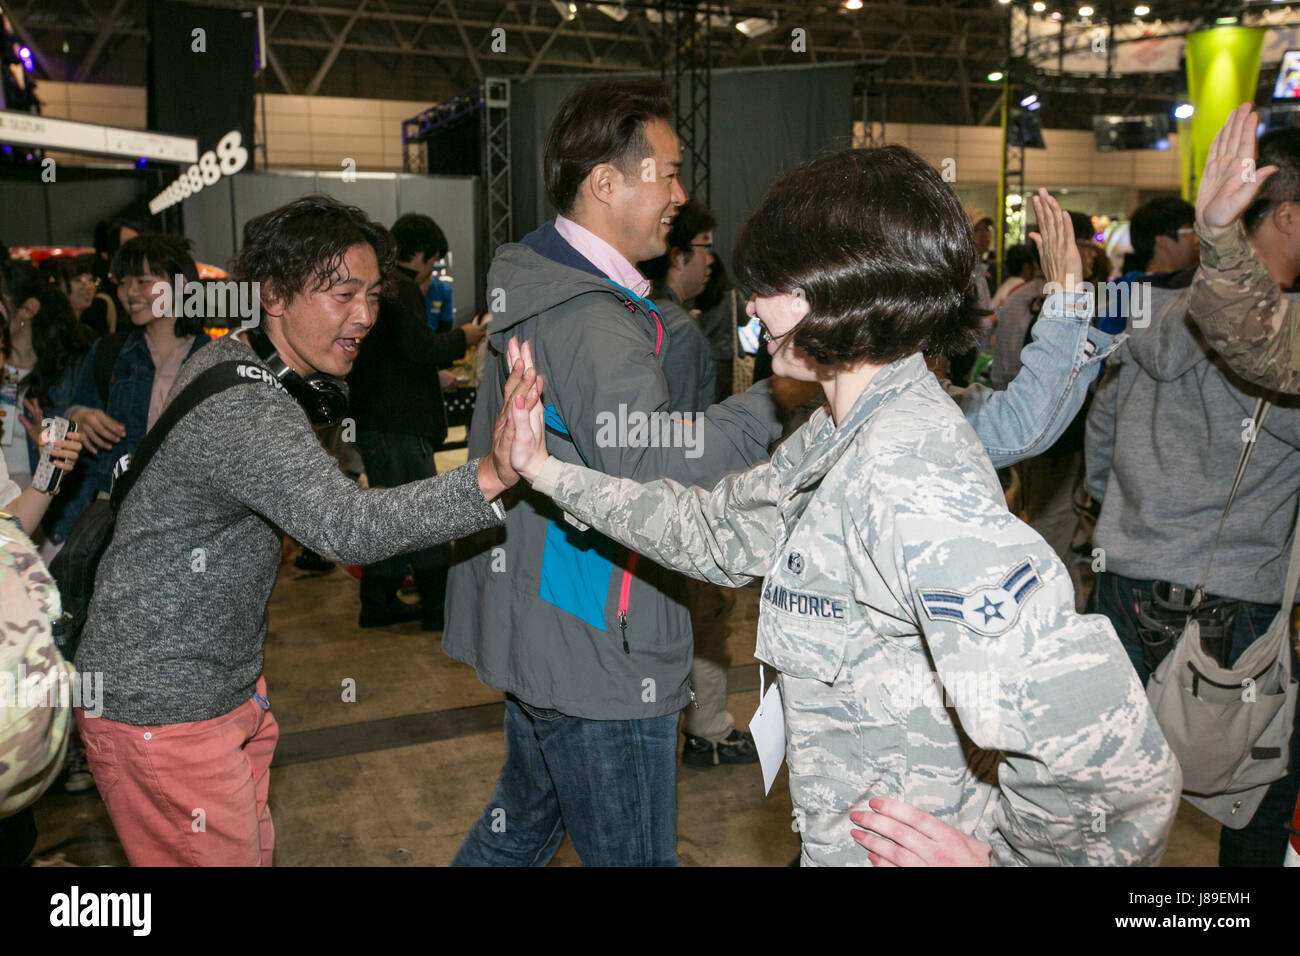 Airman 1st Class Katherine Sirois who is stationed at Camp Zama, Japan gives a high five to a Japanese fan during the opening at Niconico convention. The U.S. Army Japan Soldiers and Air Force airmen were invited to perform in front of fans of nearly 155,000 people and nearly 13 million online viewers. The 'Niconico Festival' is a multicultural entertainment and cosplay convention held annually at Mukahari Messe in Tokyo, April 30, 2017. This bilateral event was designed to promote U.S. Army Japan. Stock Photo